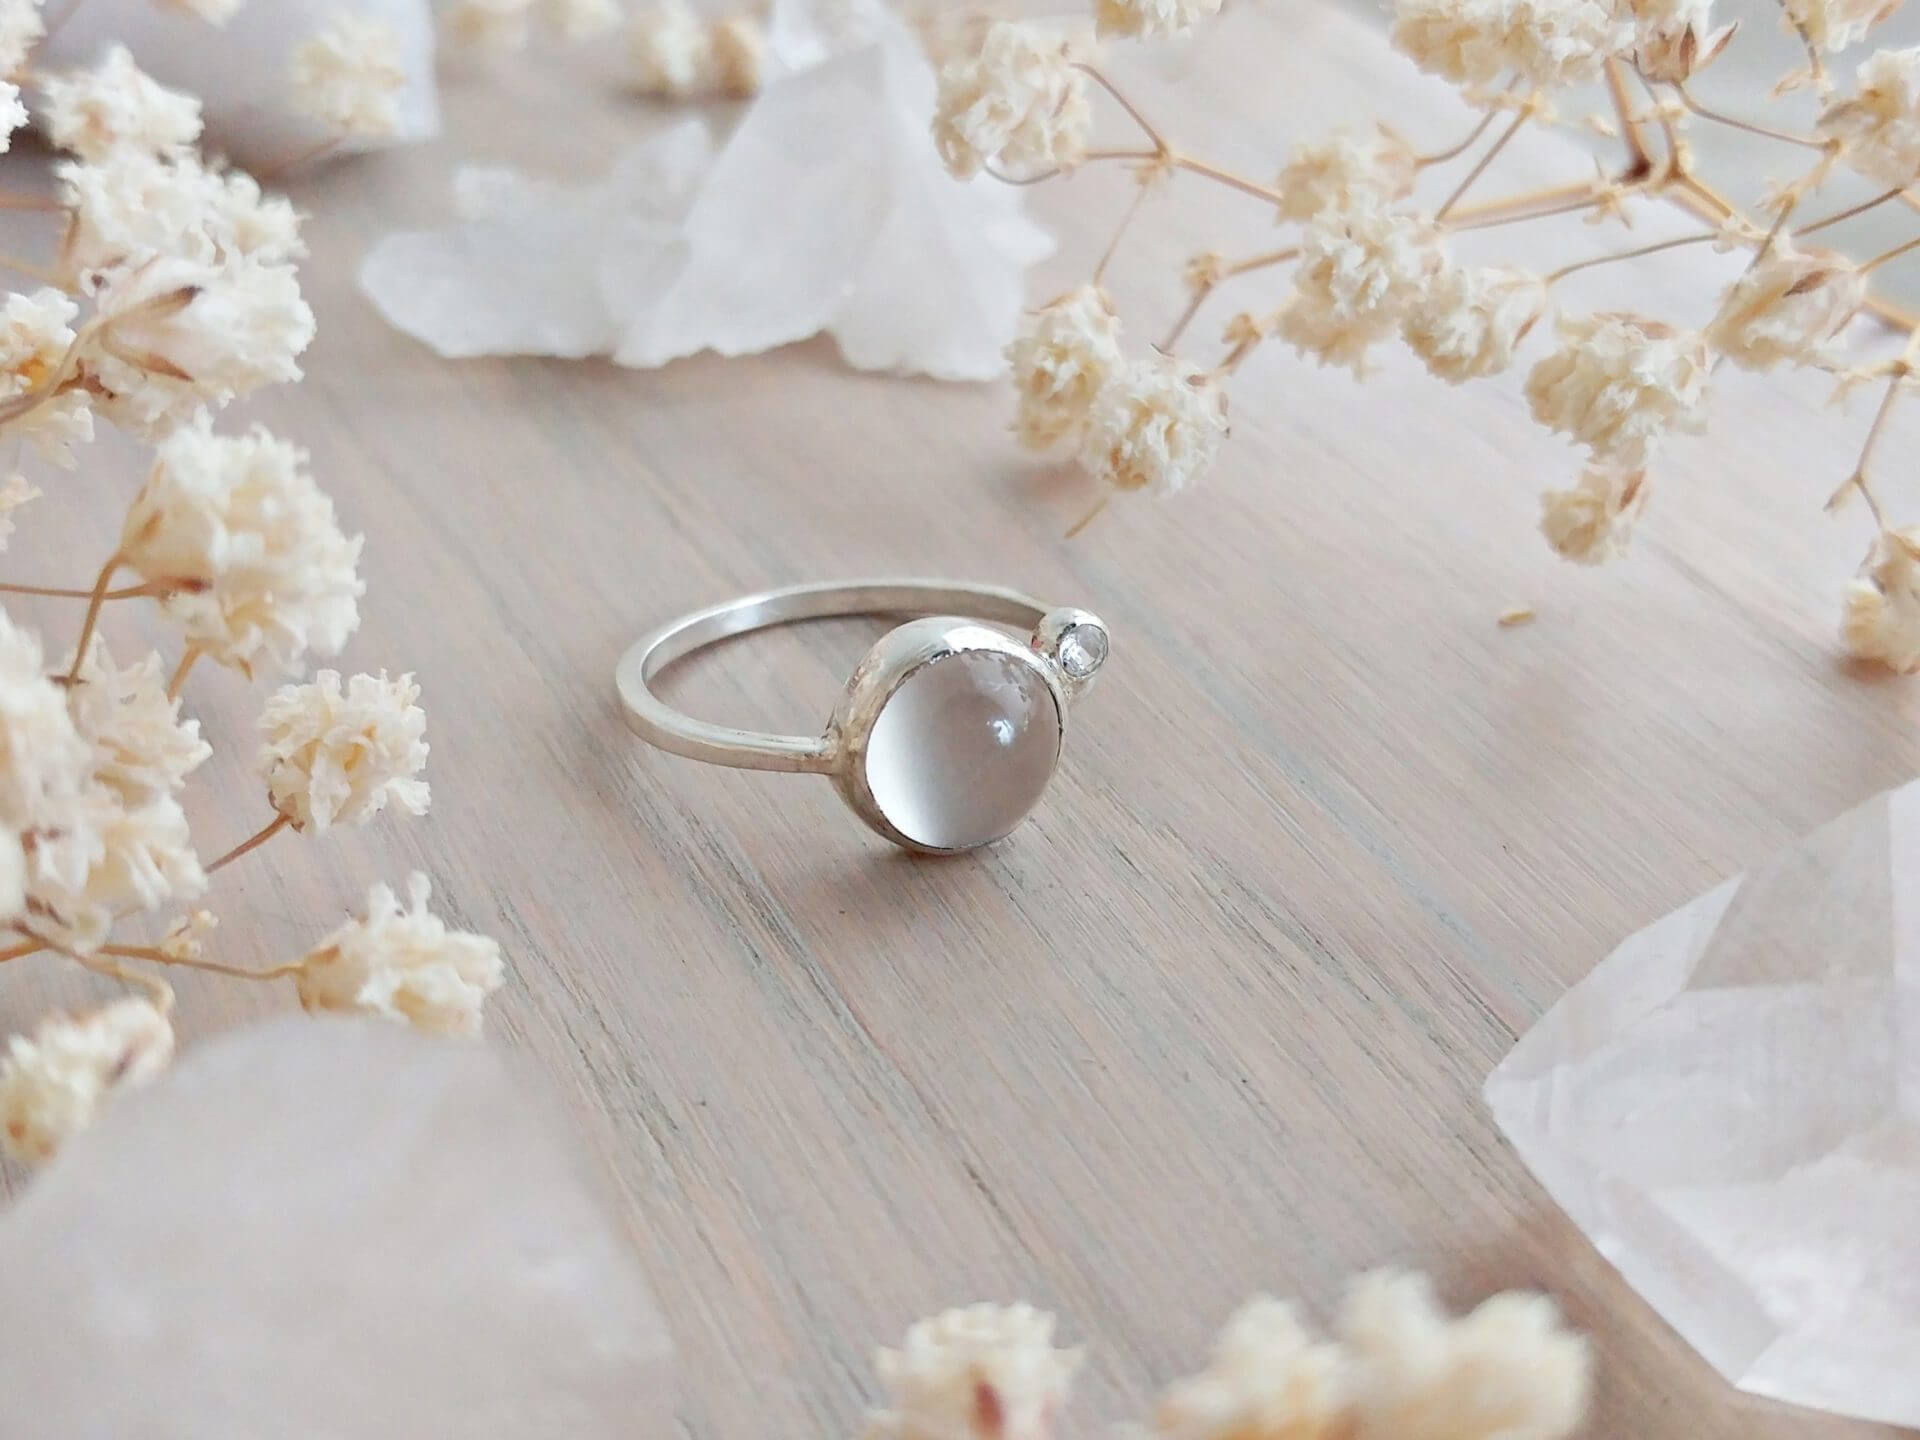 Vintage Oval Moonstone Engagement Ring White Gold Halo Wedding Ring Antique  Art Deco Moissanite Ring Unique Promise Anniversary Ring - Etsy | Moonstone  engagement ring rose gold, Antique wedding rings, Engagement ring